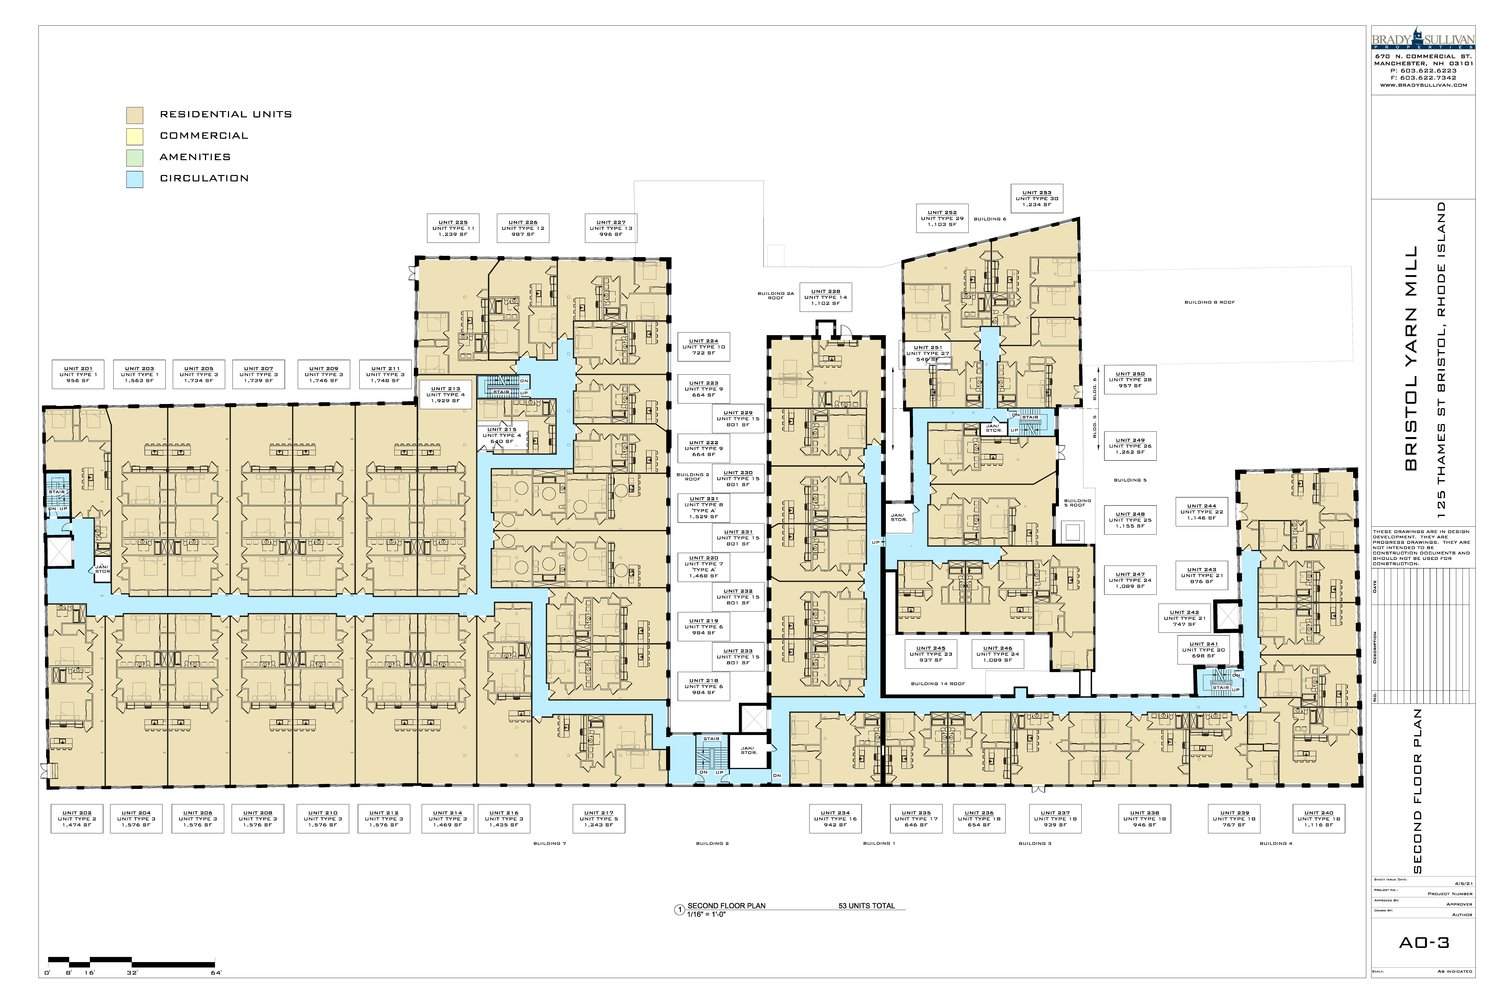 This is the proposed first-floor design, with 53 apartments, ranging from 600 to 1,800 square feet.